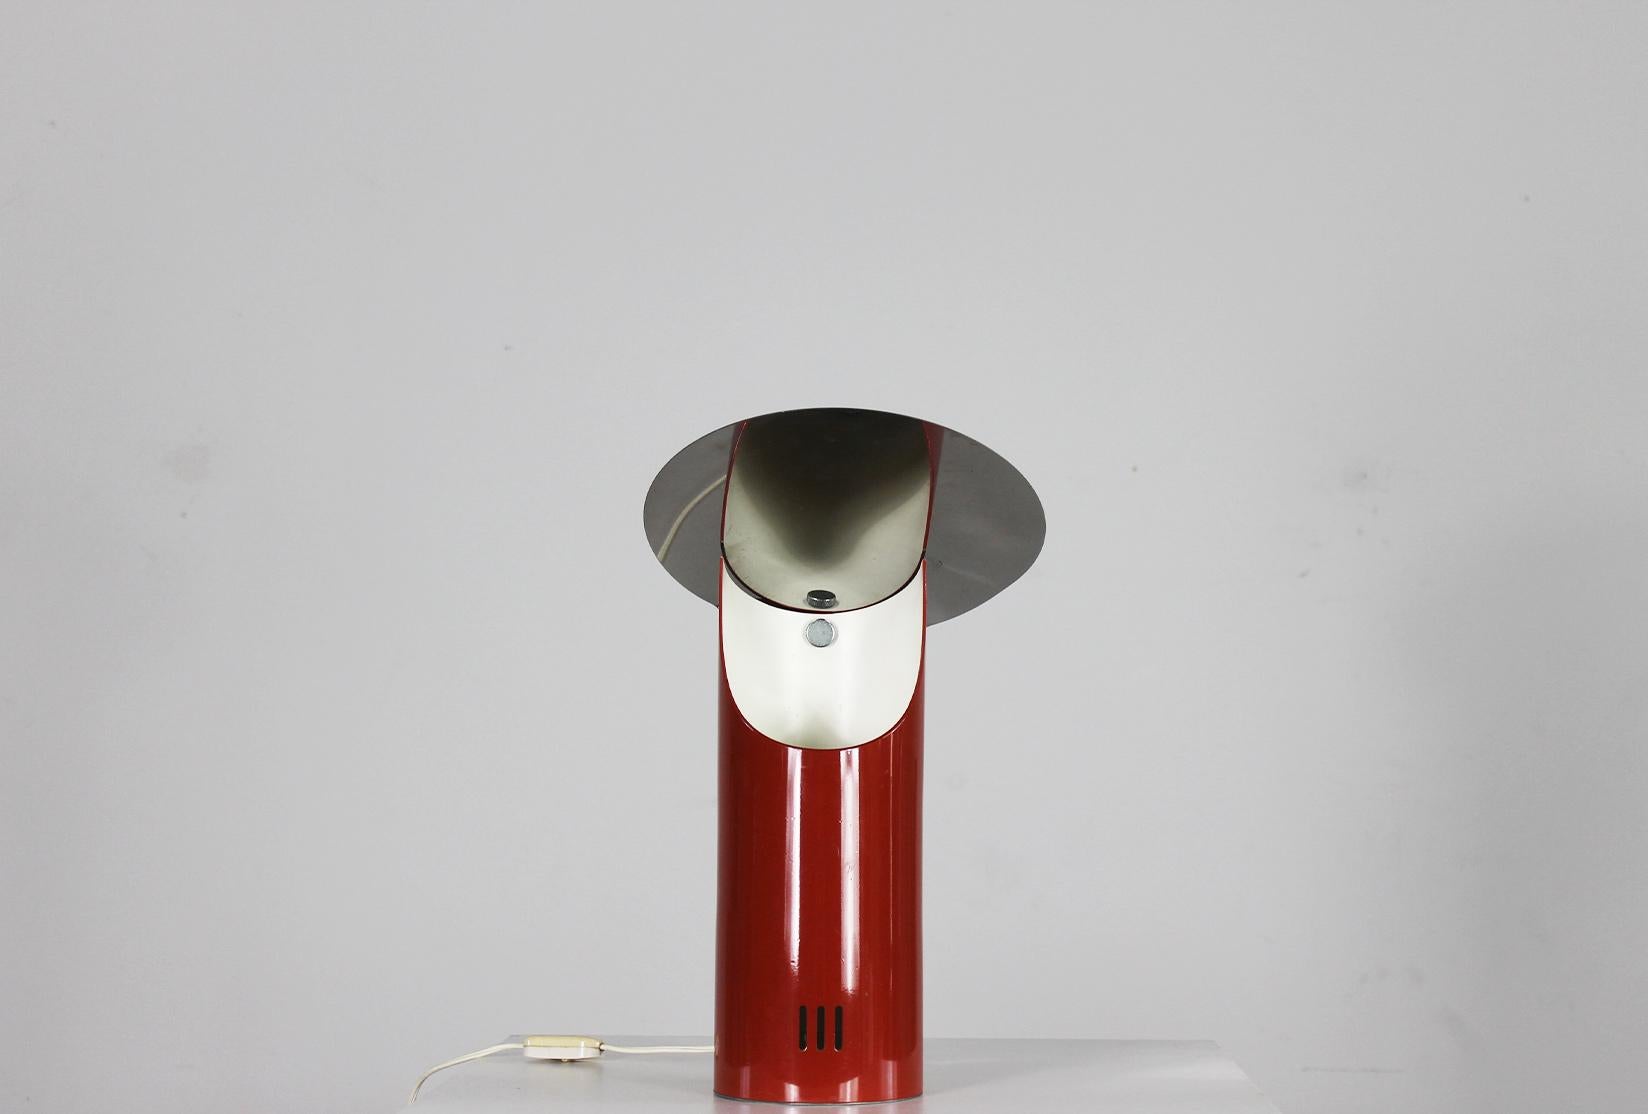 Italian Table Lamp in Red Lacquered Stainless Steel by Studio Set 1970s Italy For Sale